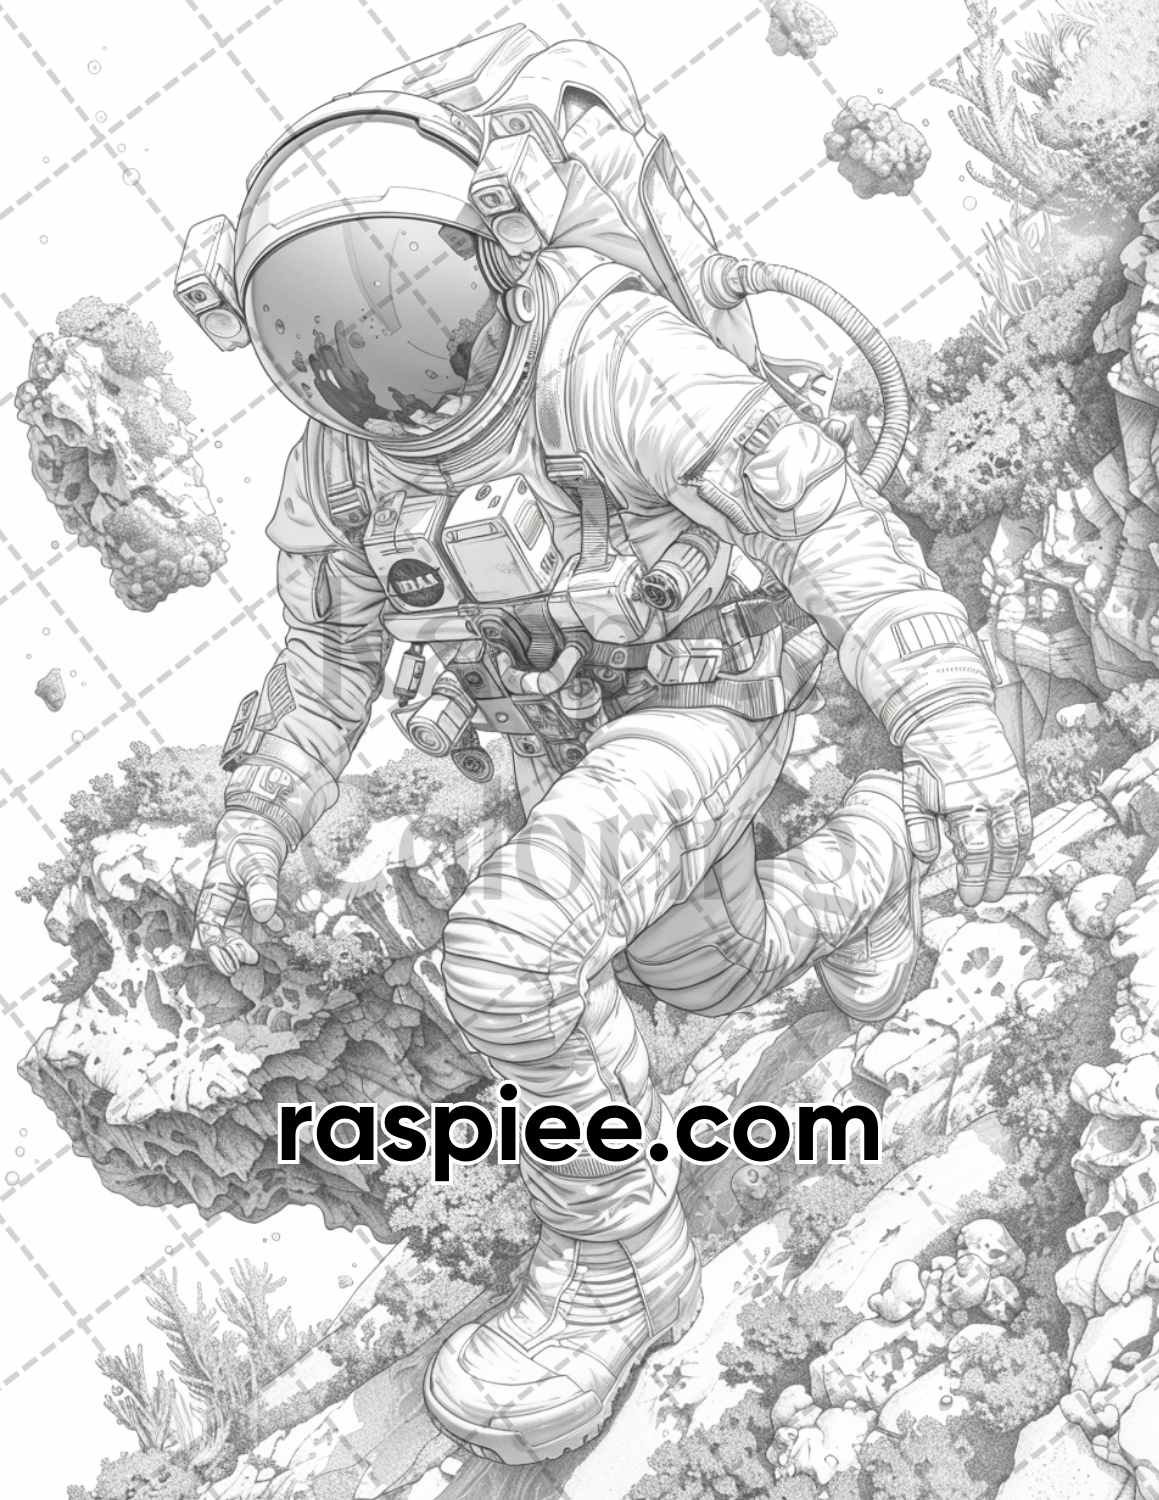 adult coloring pages, adult coloring sheets, adult coloring book pdf, adult coloring book printable, grayscale coloring pages, grayscale coloring books, astronaut coloring pages for adults, astronaut coloring book, grayscale illustration, fantasy coloring pages, fantasy coloring book